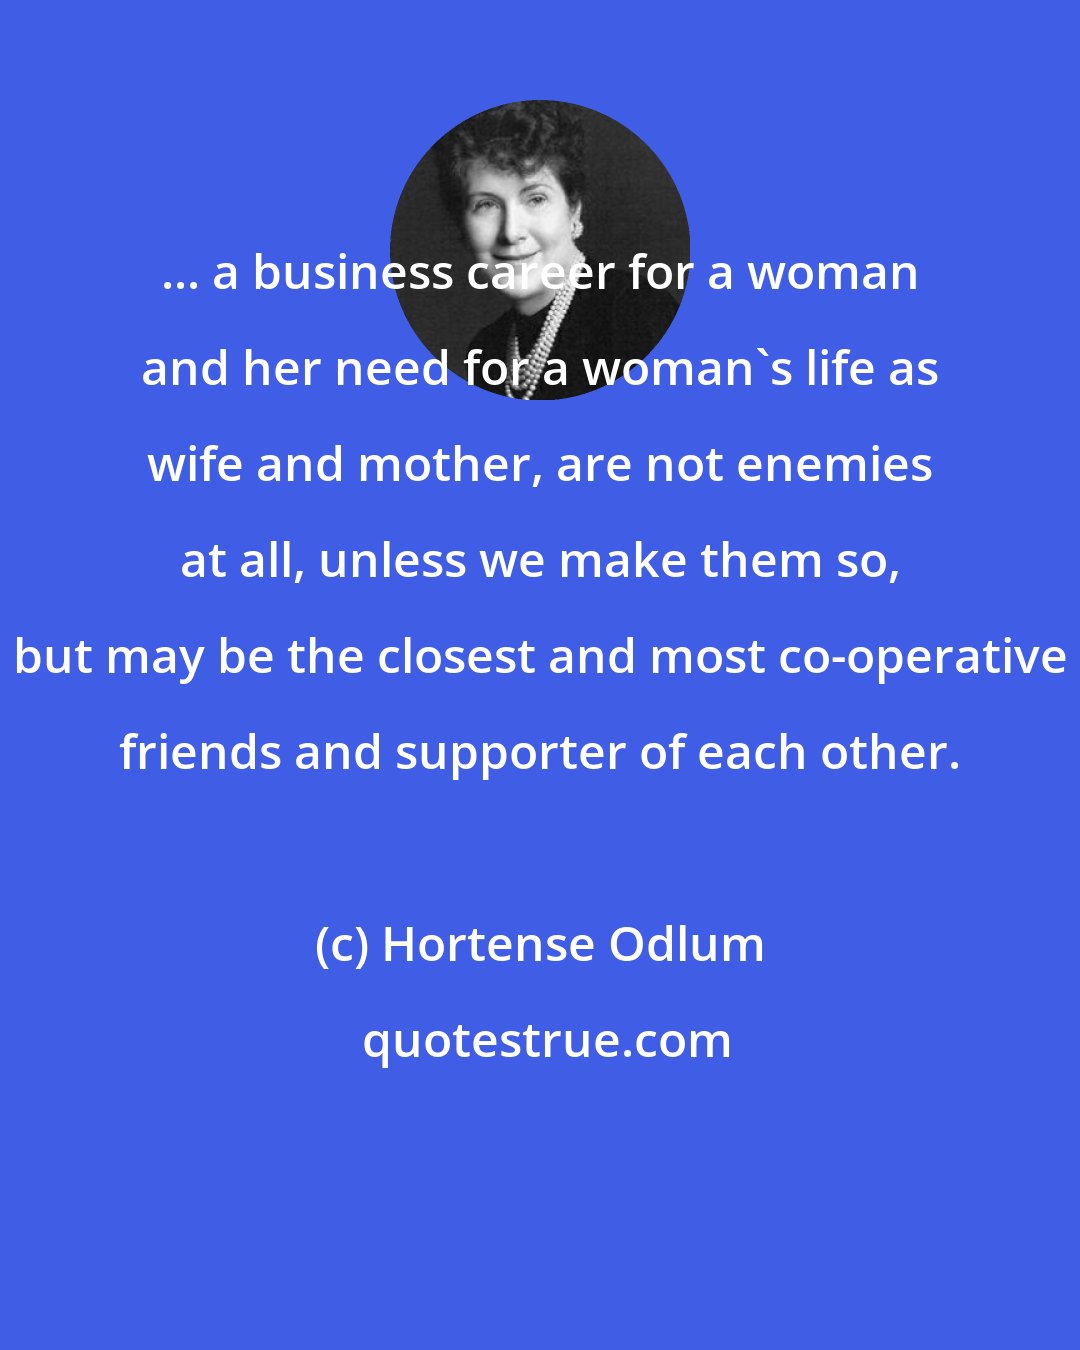 Hortense Odlum: ... a business career for a woman and her need for a woman's life as wife and mother, are not enemies at all, unless we make them so, but may be the closest and most co-operative friends and supporter of each other.